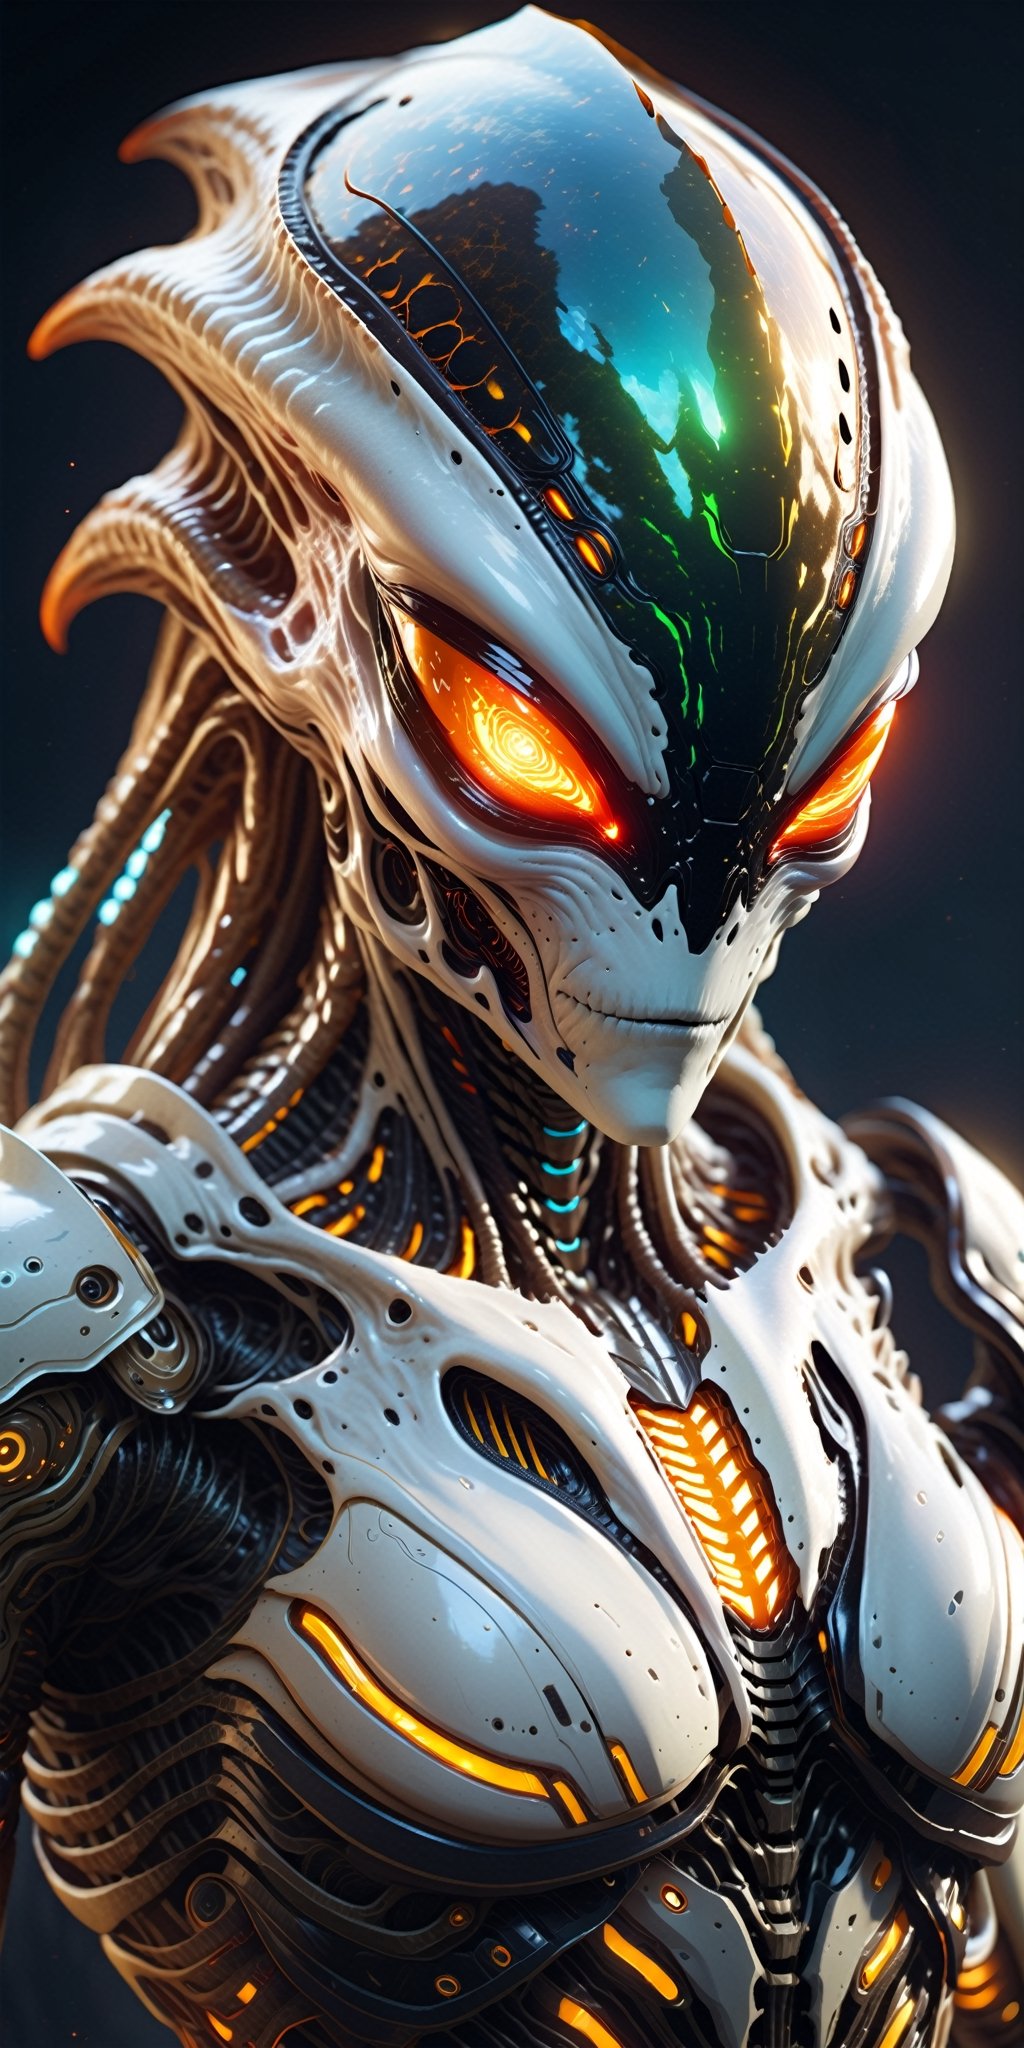 Create a spine-chilling image of an alien creature adorned in Hi-Tech biometric glowing armor, radiating a deadly and intimidating aura. Showcase the alien's otherworldly features and cutting-edge technology, resulting in a mesmerizing and frightening visual narrative.